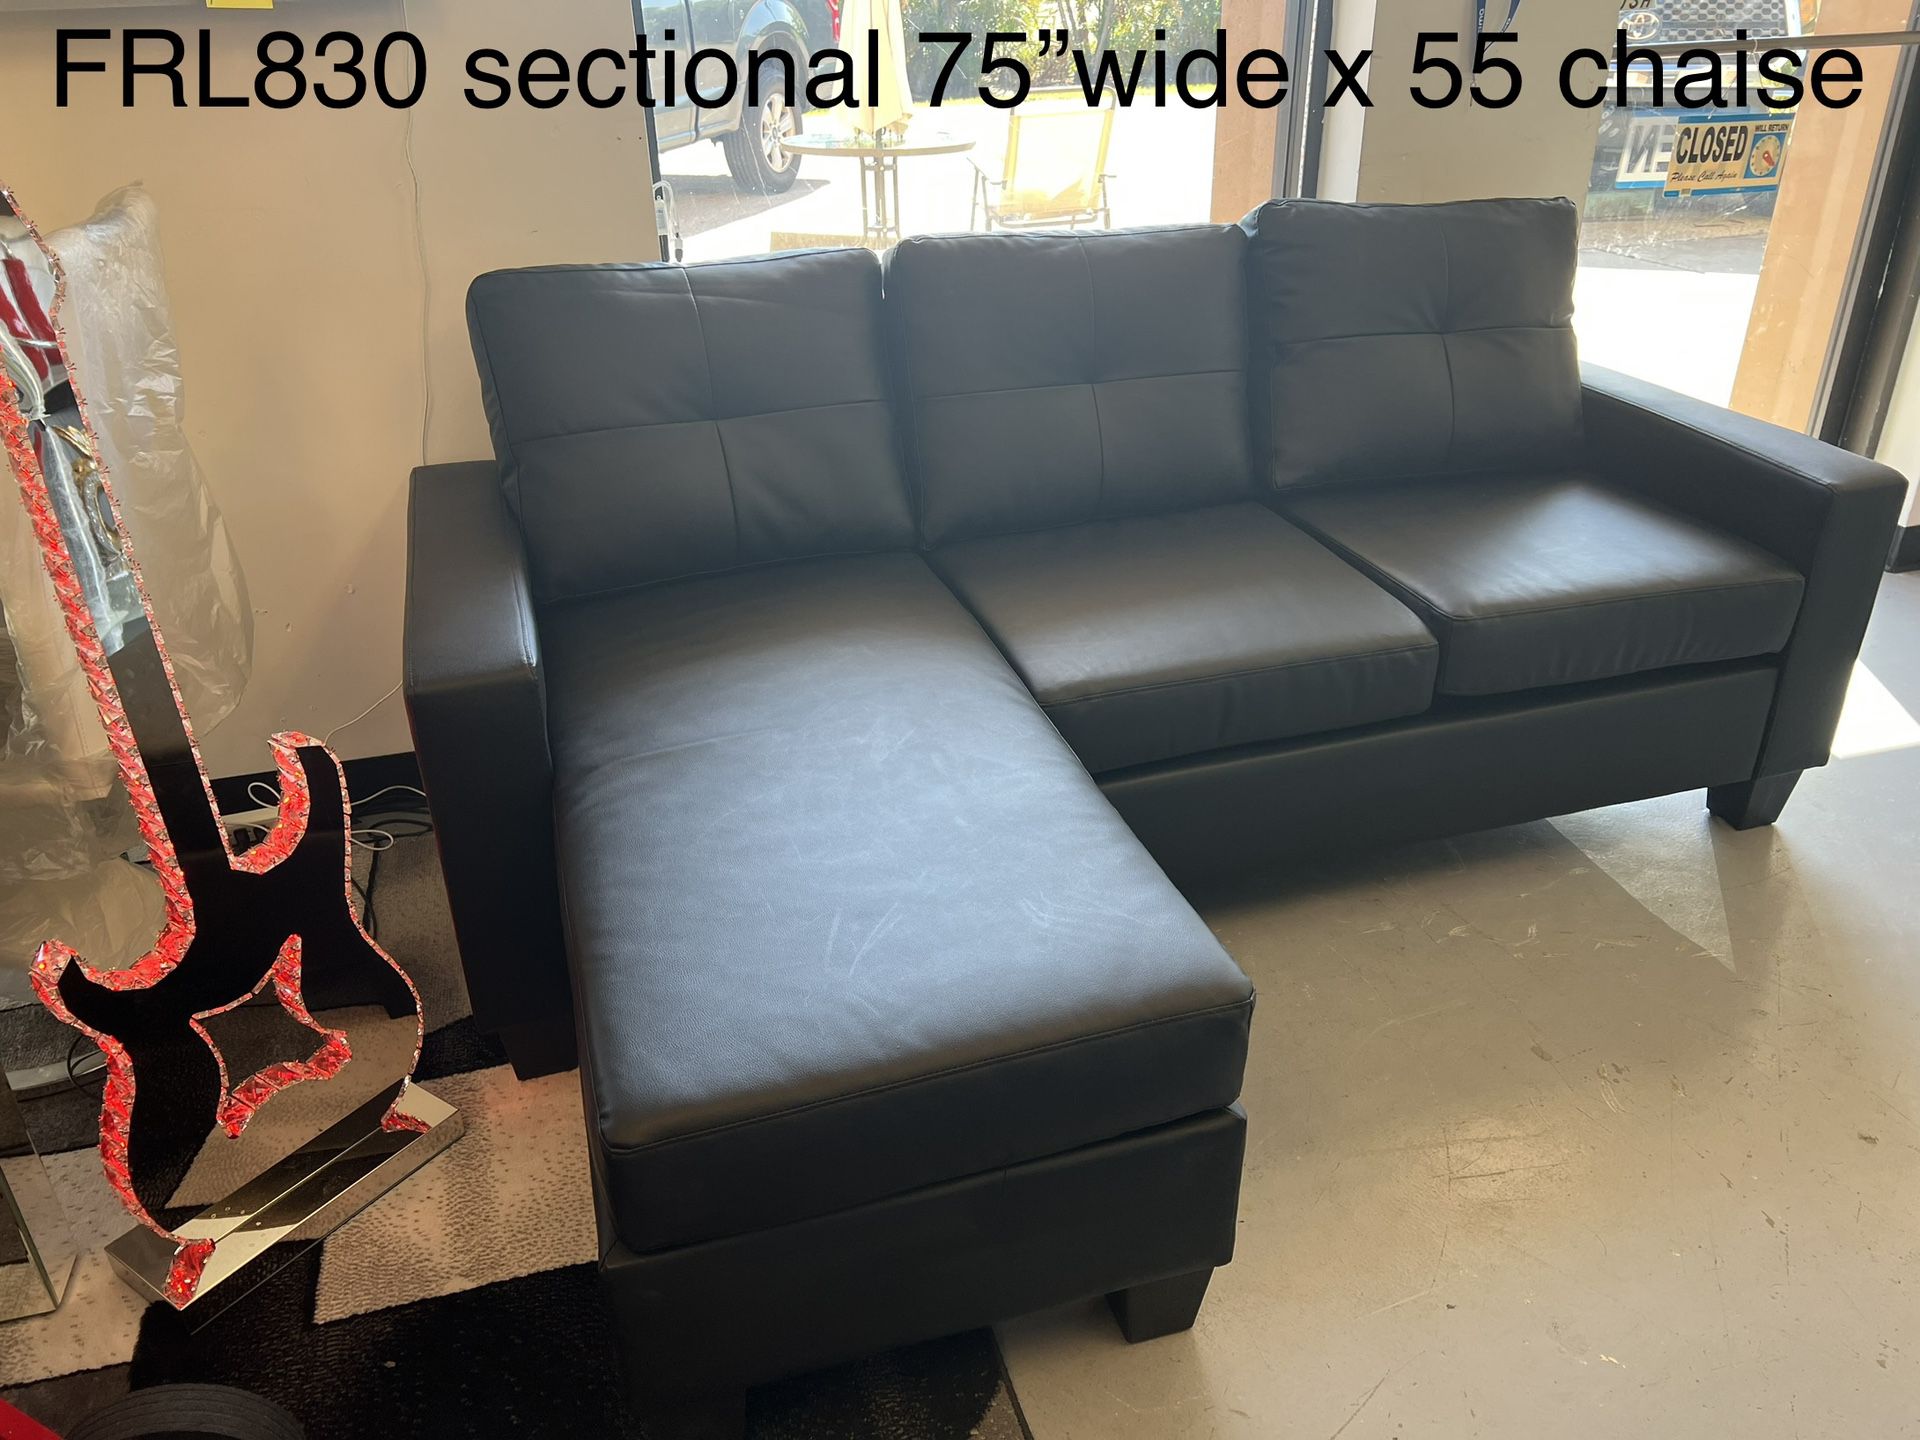 New Black Small Sectional Perfect For Game Room Or Small Size Room K Furniture And More 